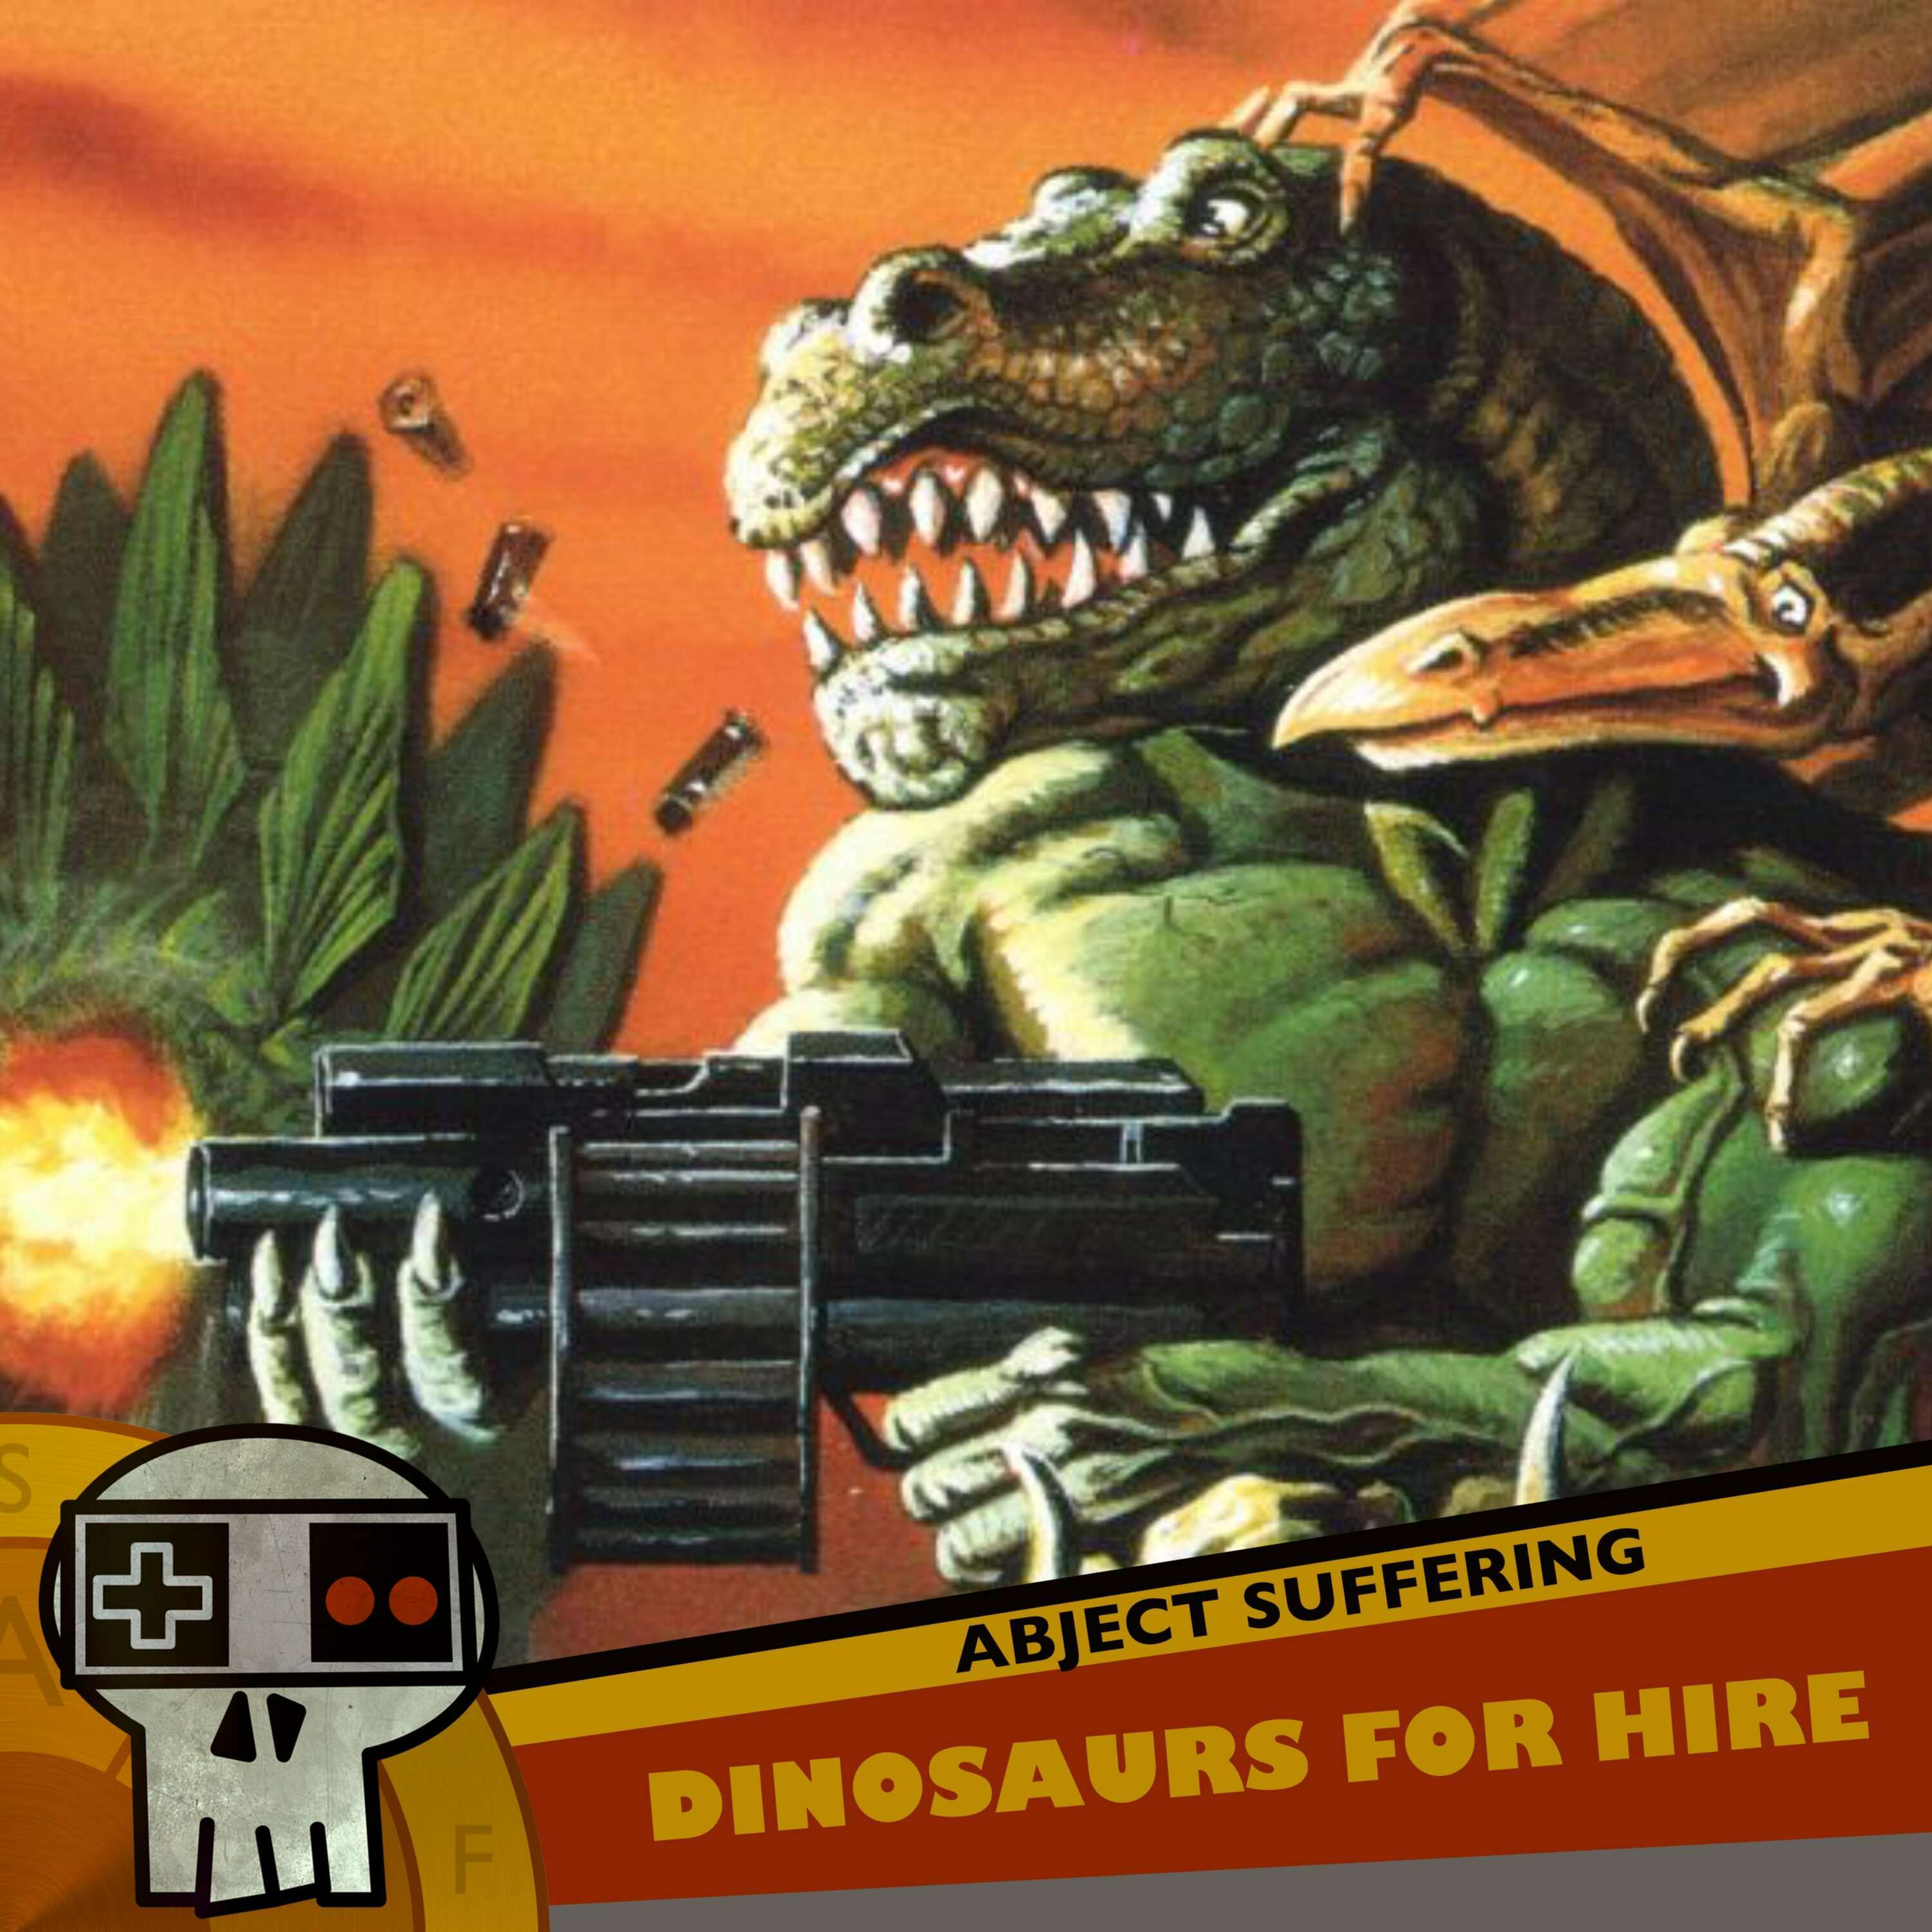 547: Dinosaurs for Hire